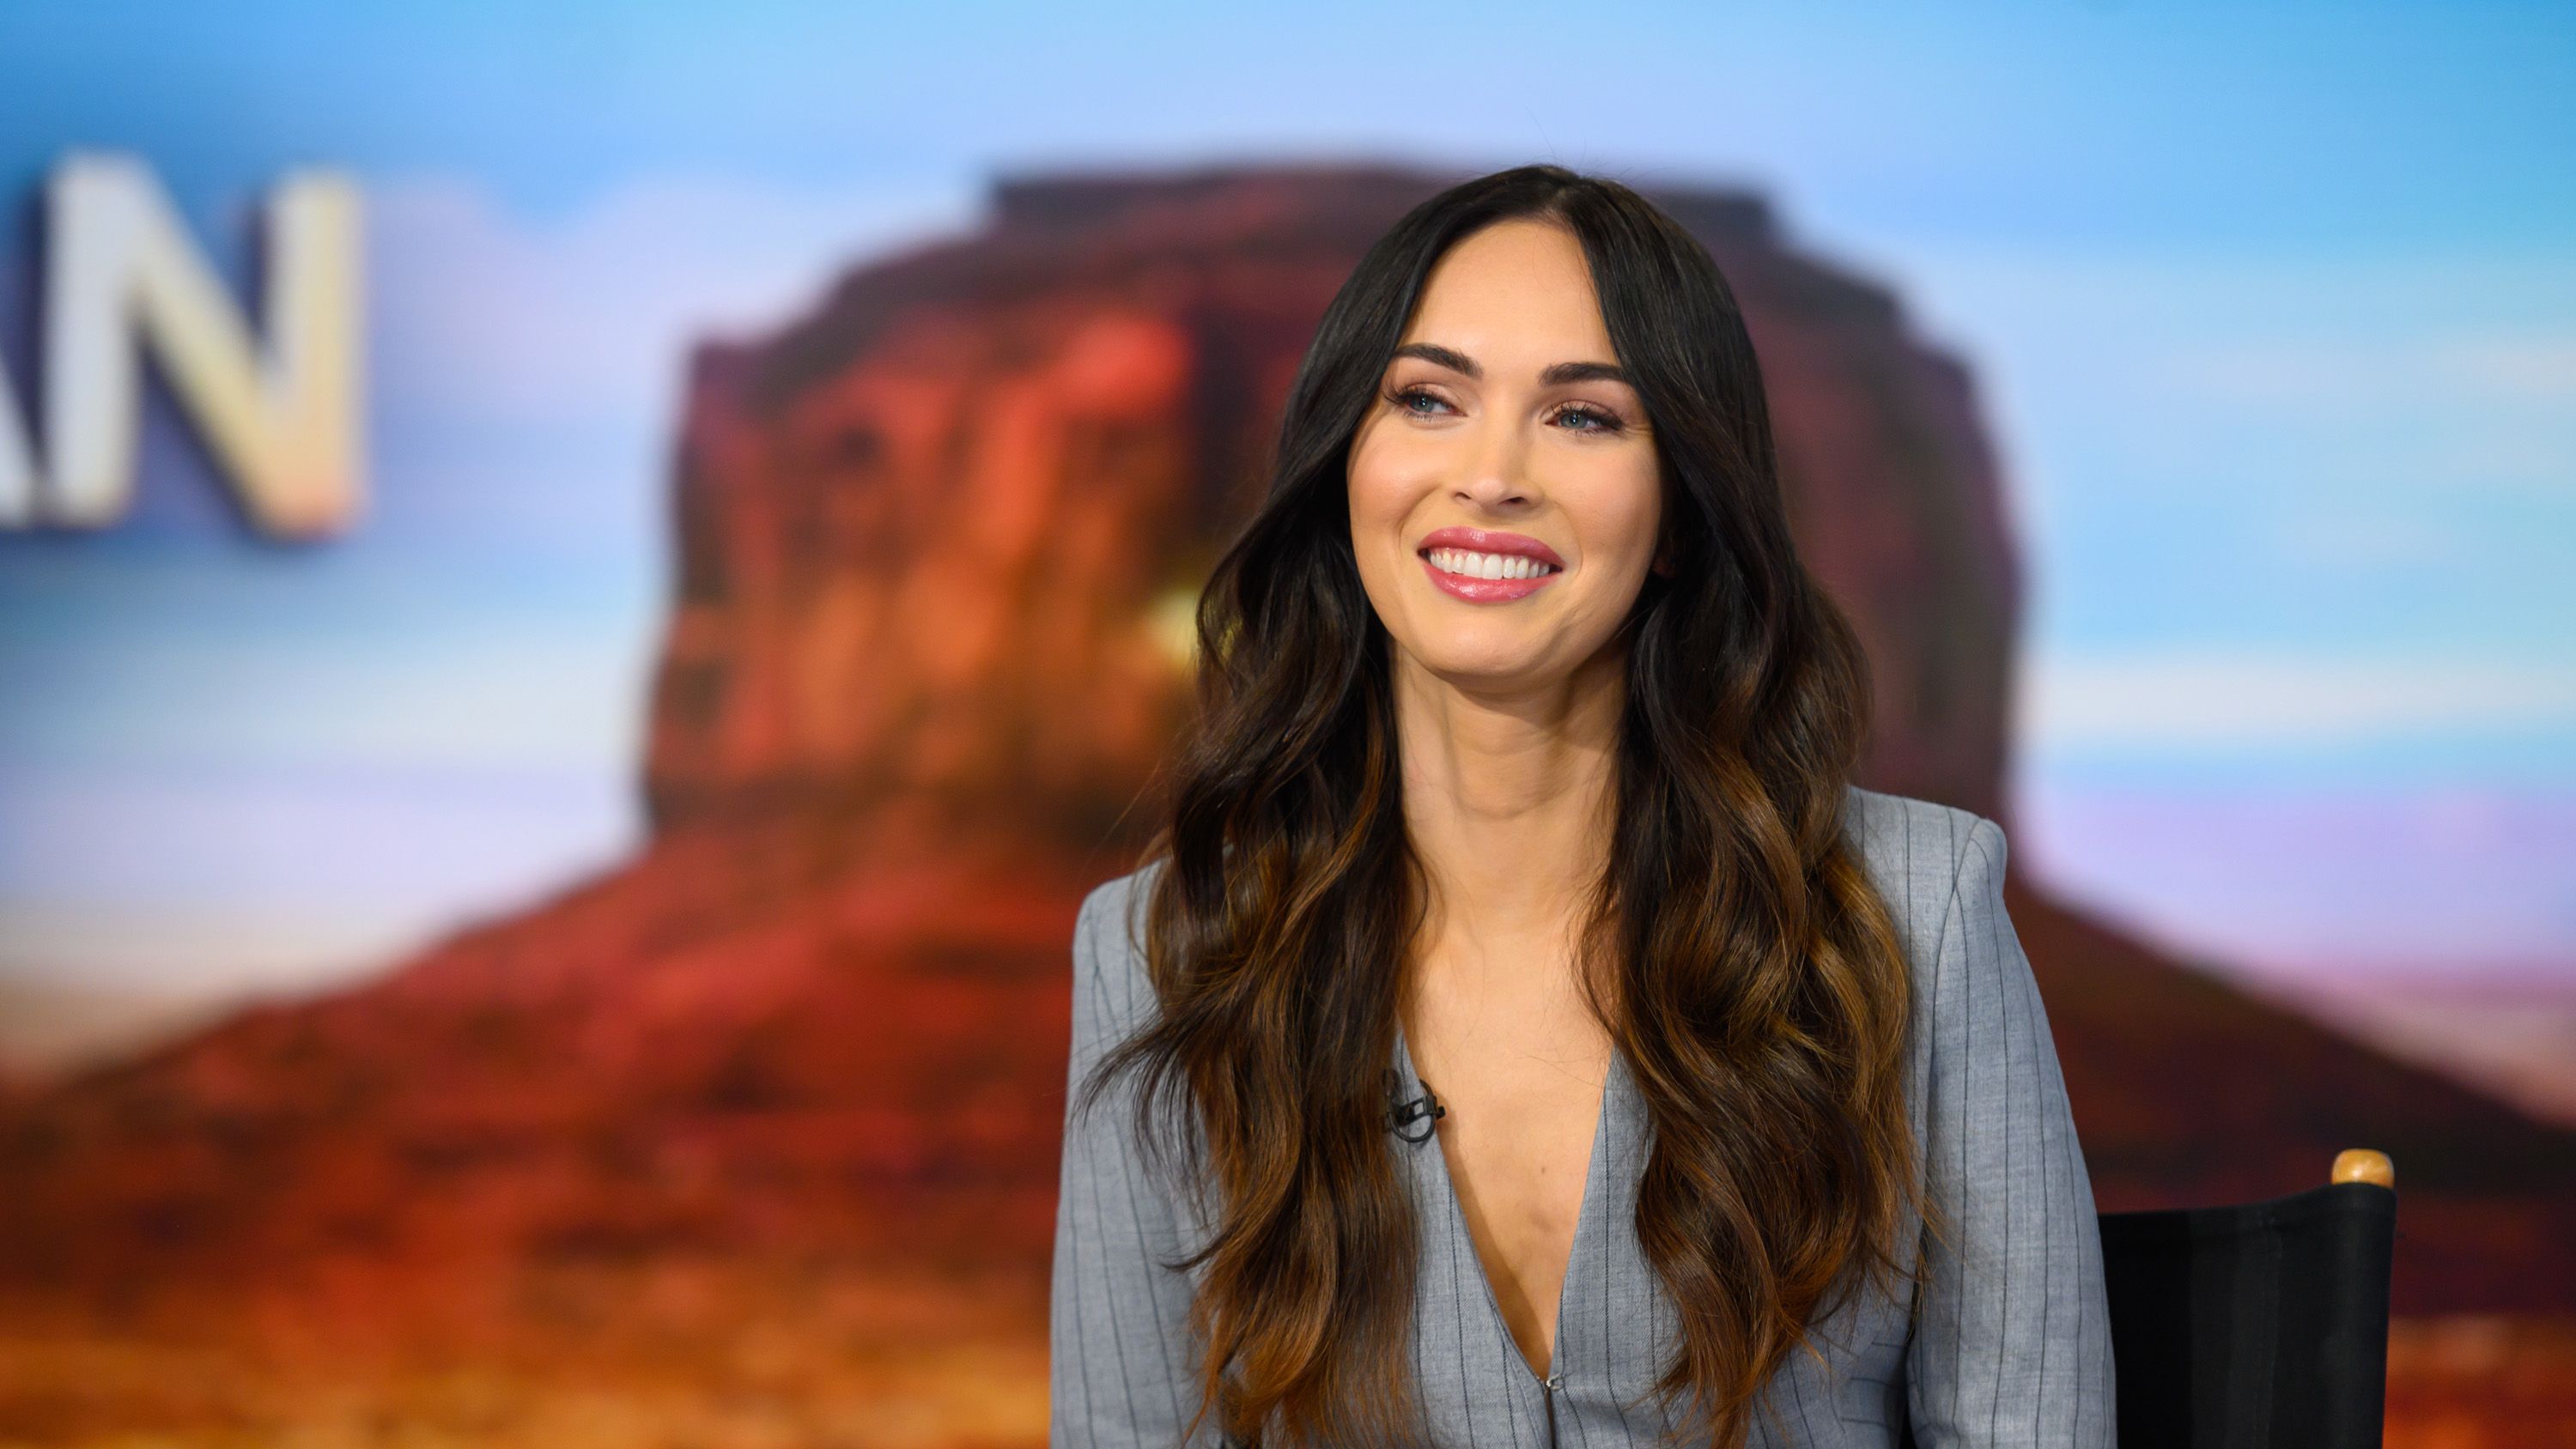 Fans Call on Hollywood, Jimmy Kimmel, and Michael Bay to Apologize to Megan  Fox